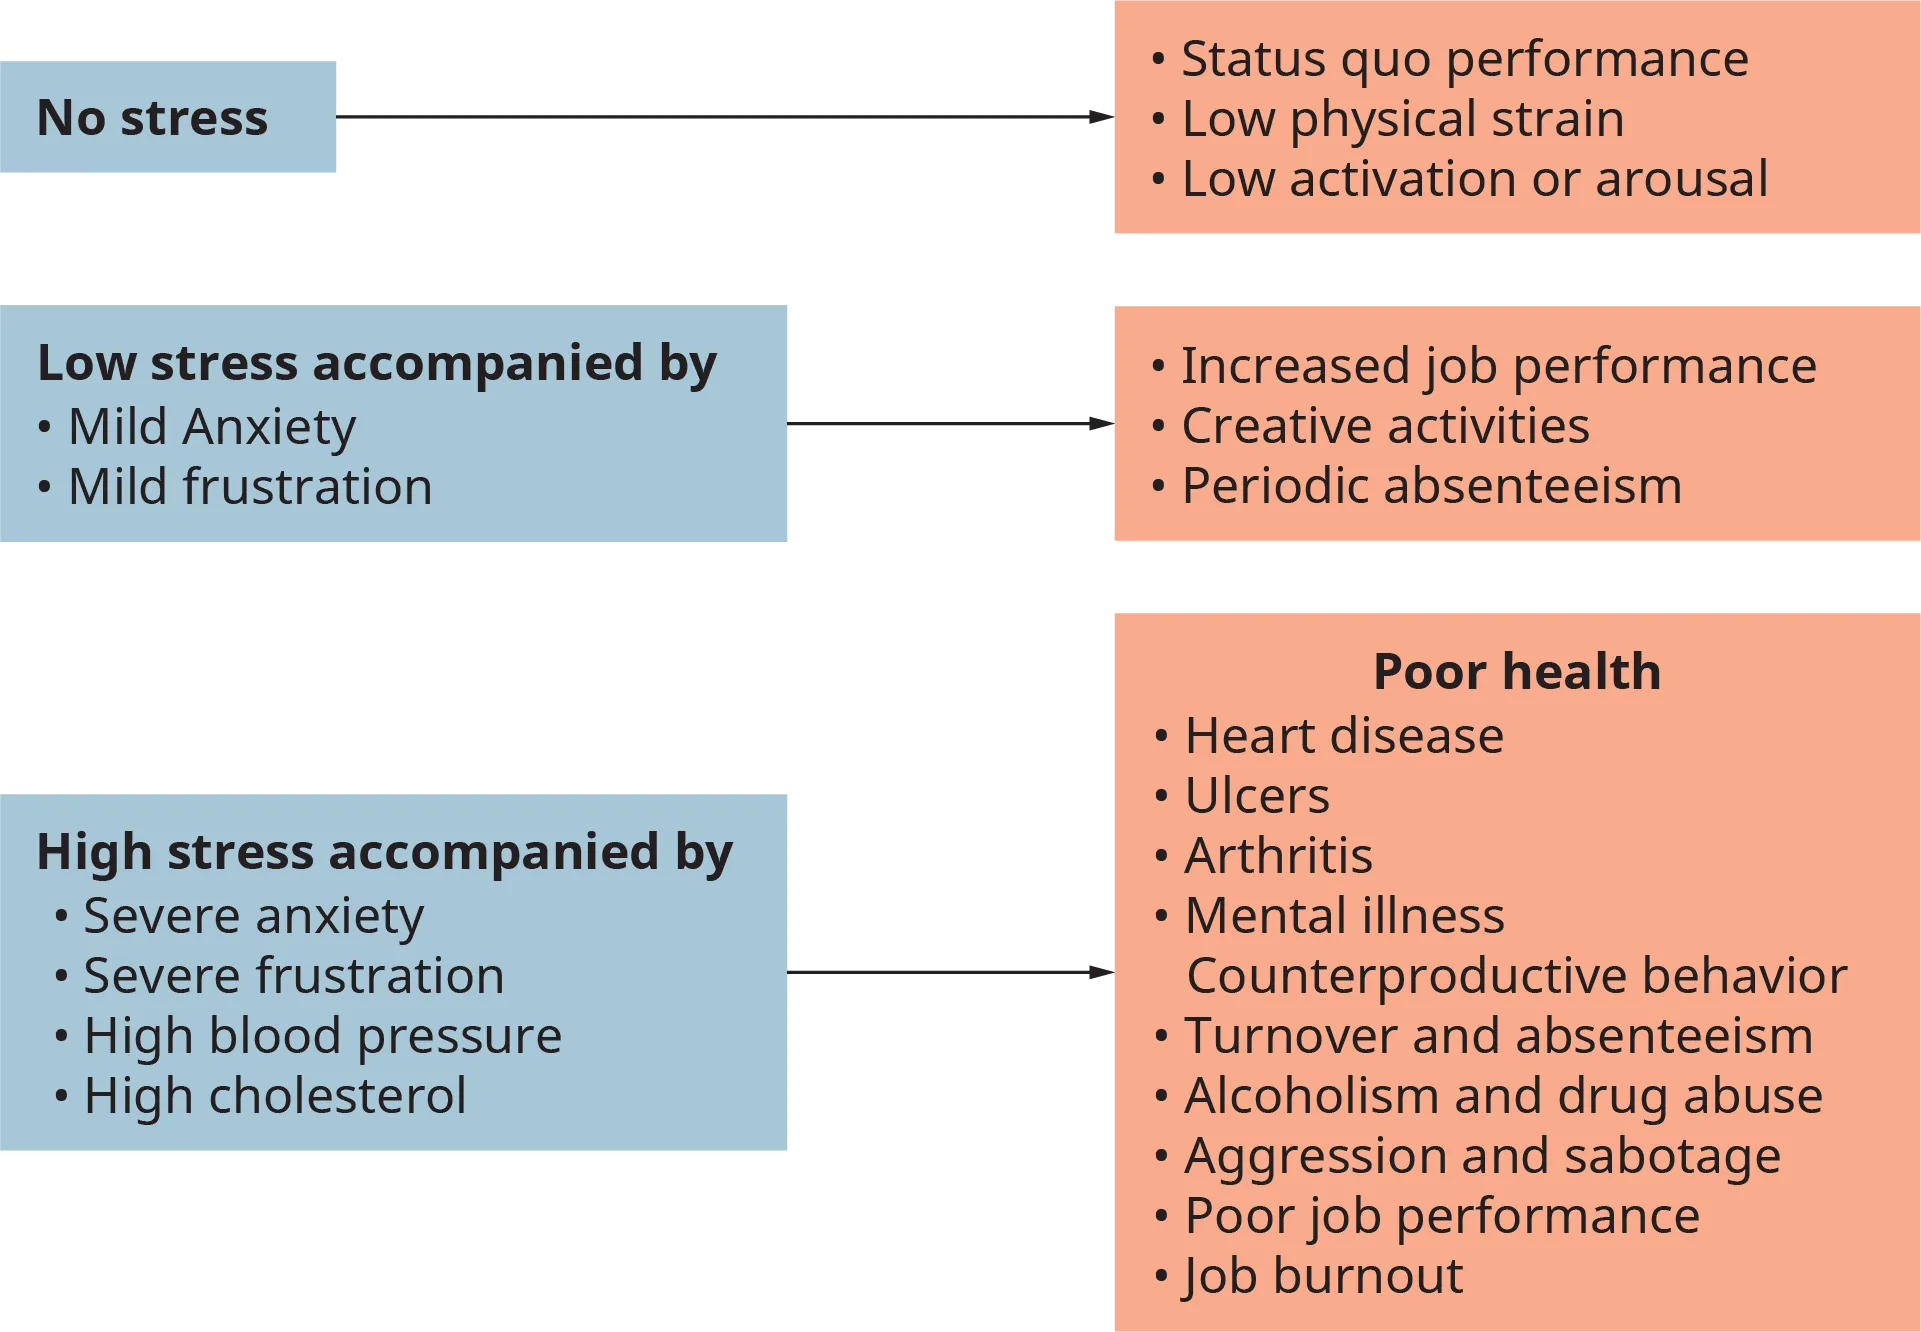 An illustration shows the major consequences at three different intensity levels of work-related stress.